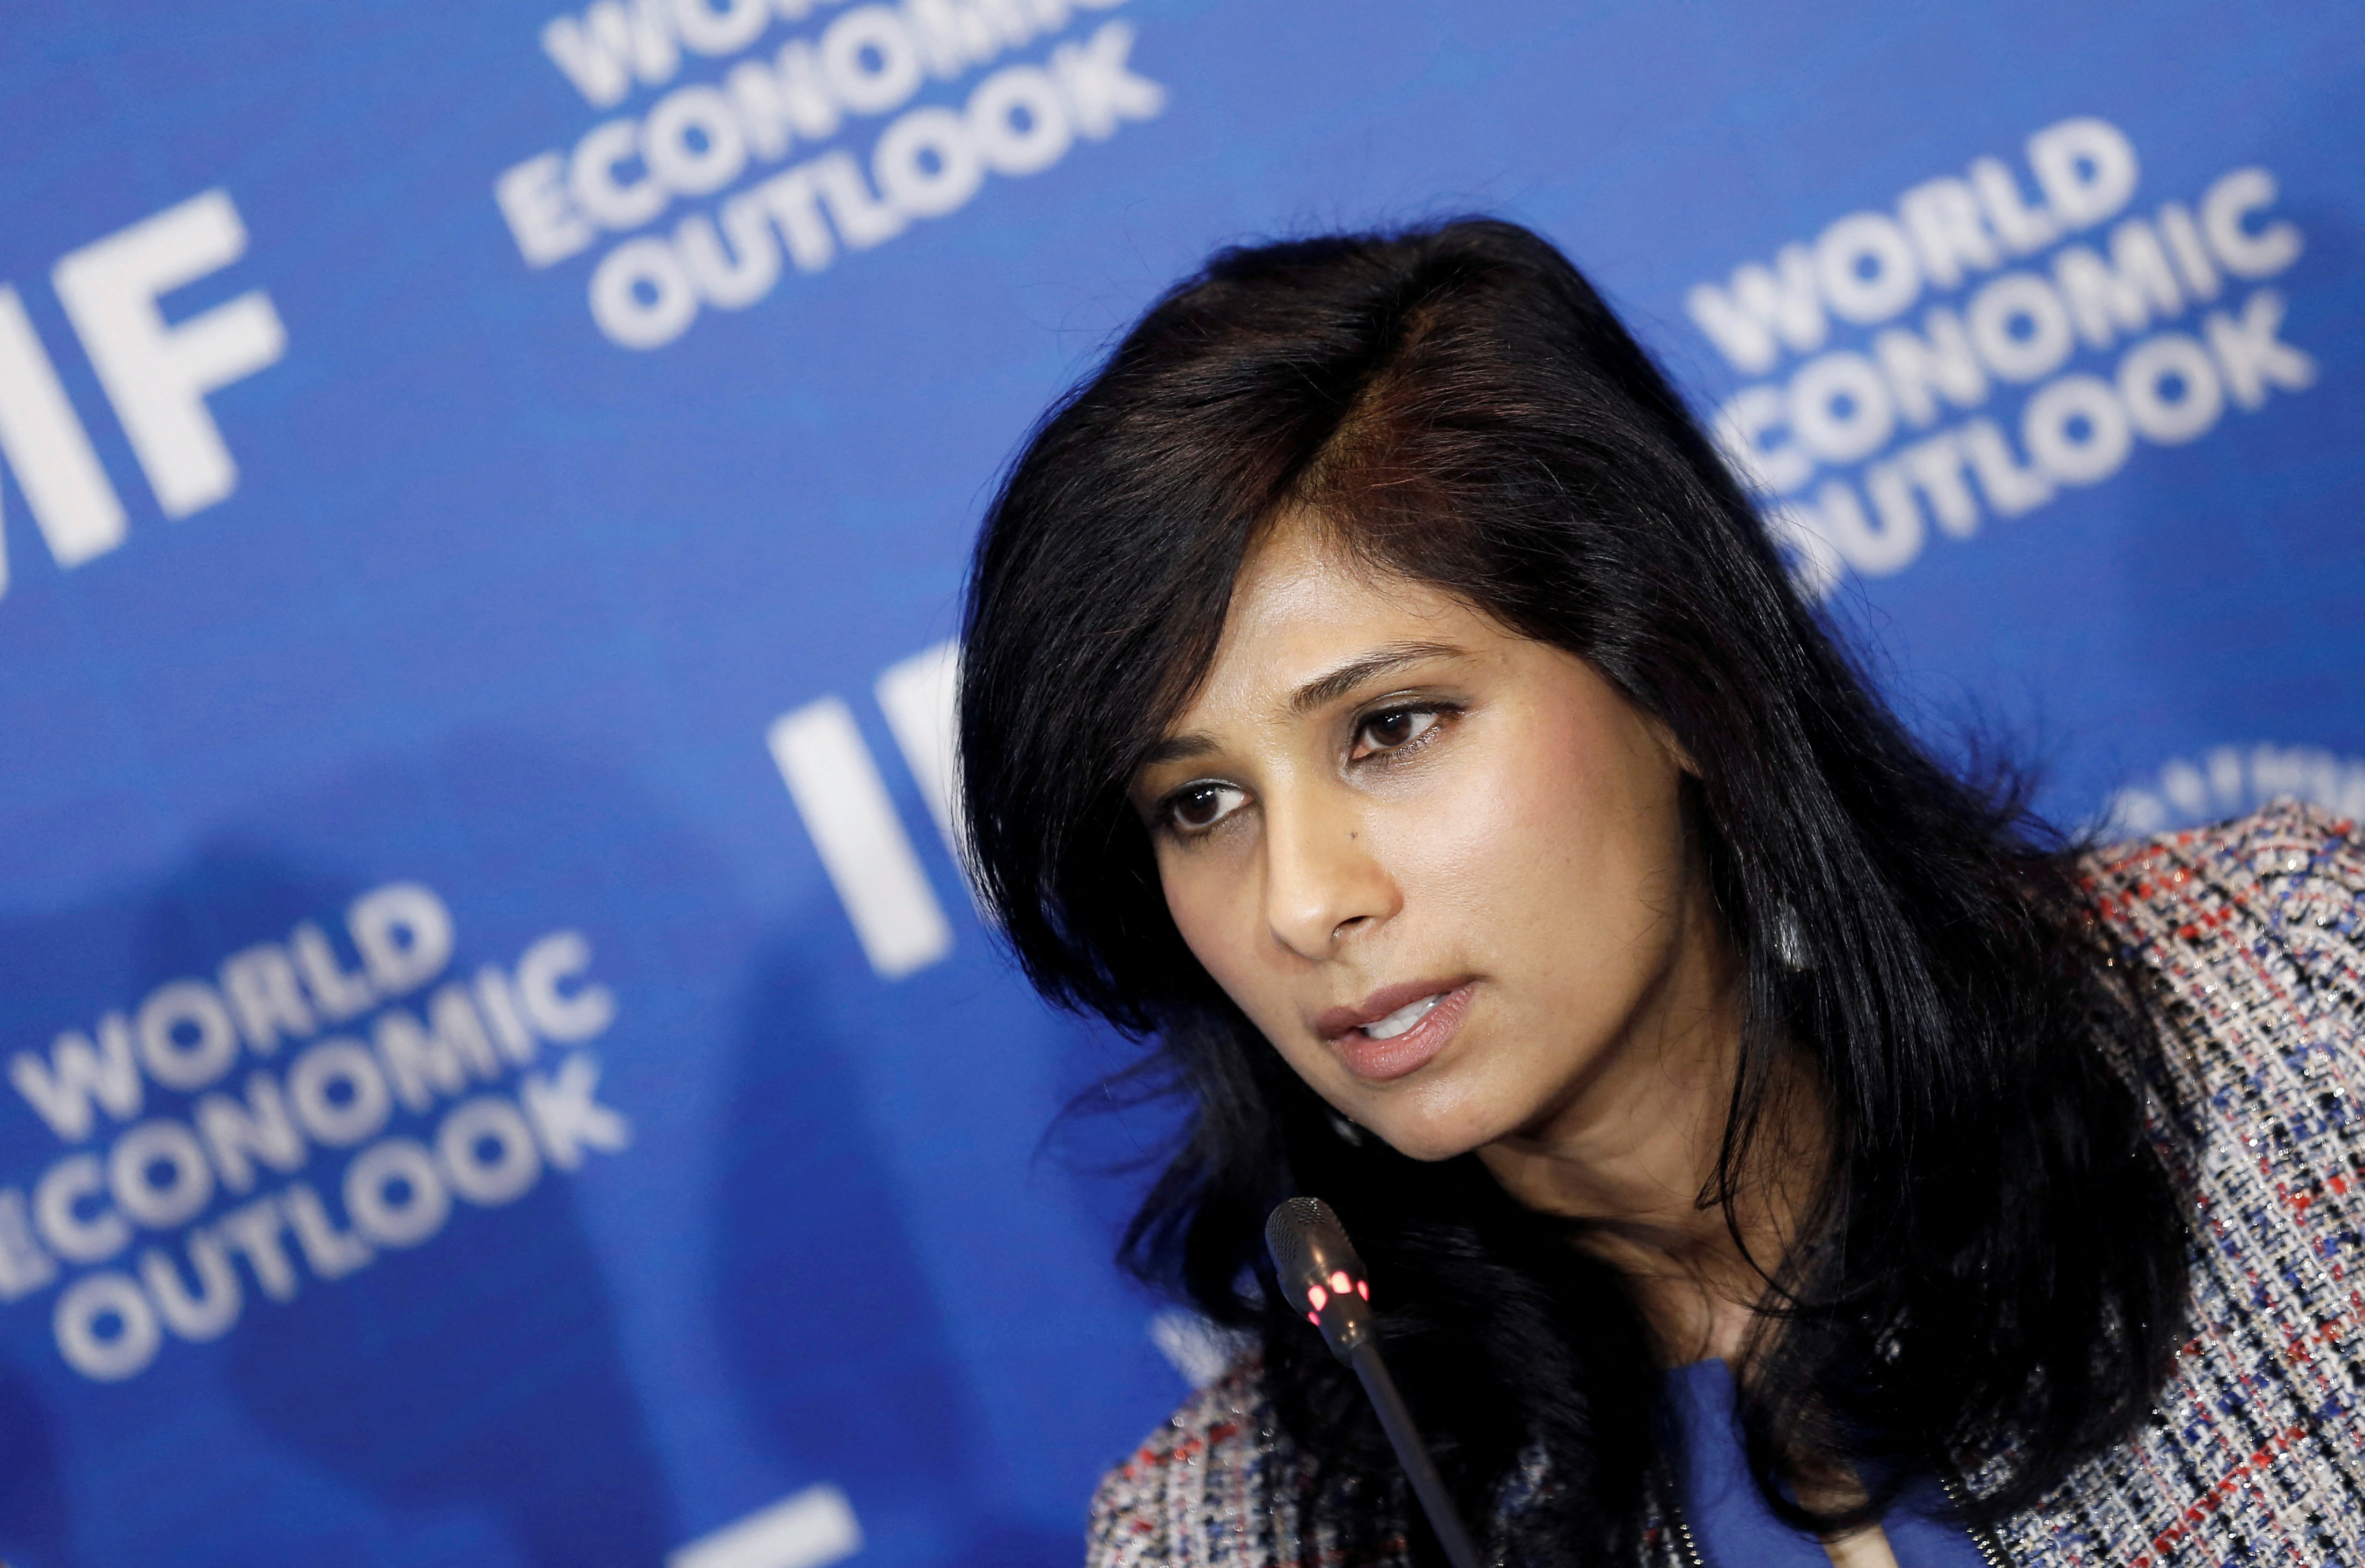 Gita Gopinath, Economic Counsellor and Director of the Research Department at the International Monetary Fund (IMF), speaks during a news conference in Santiago